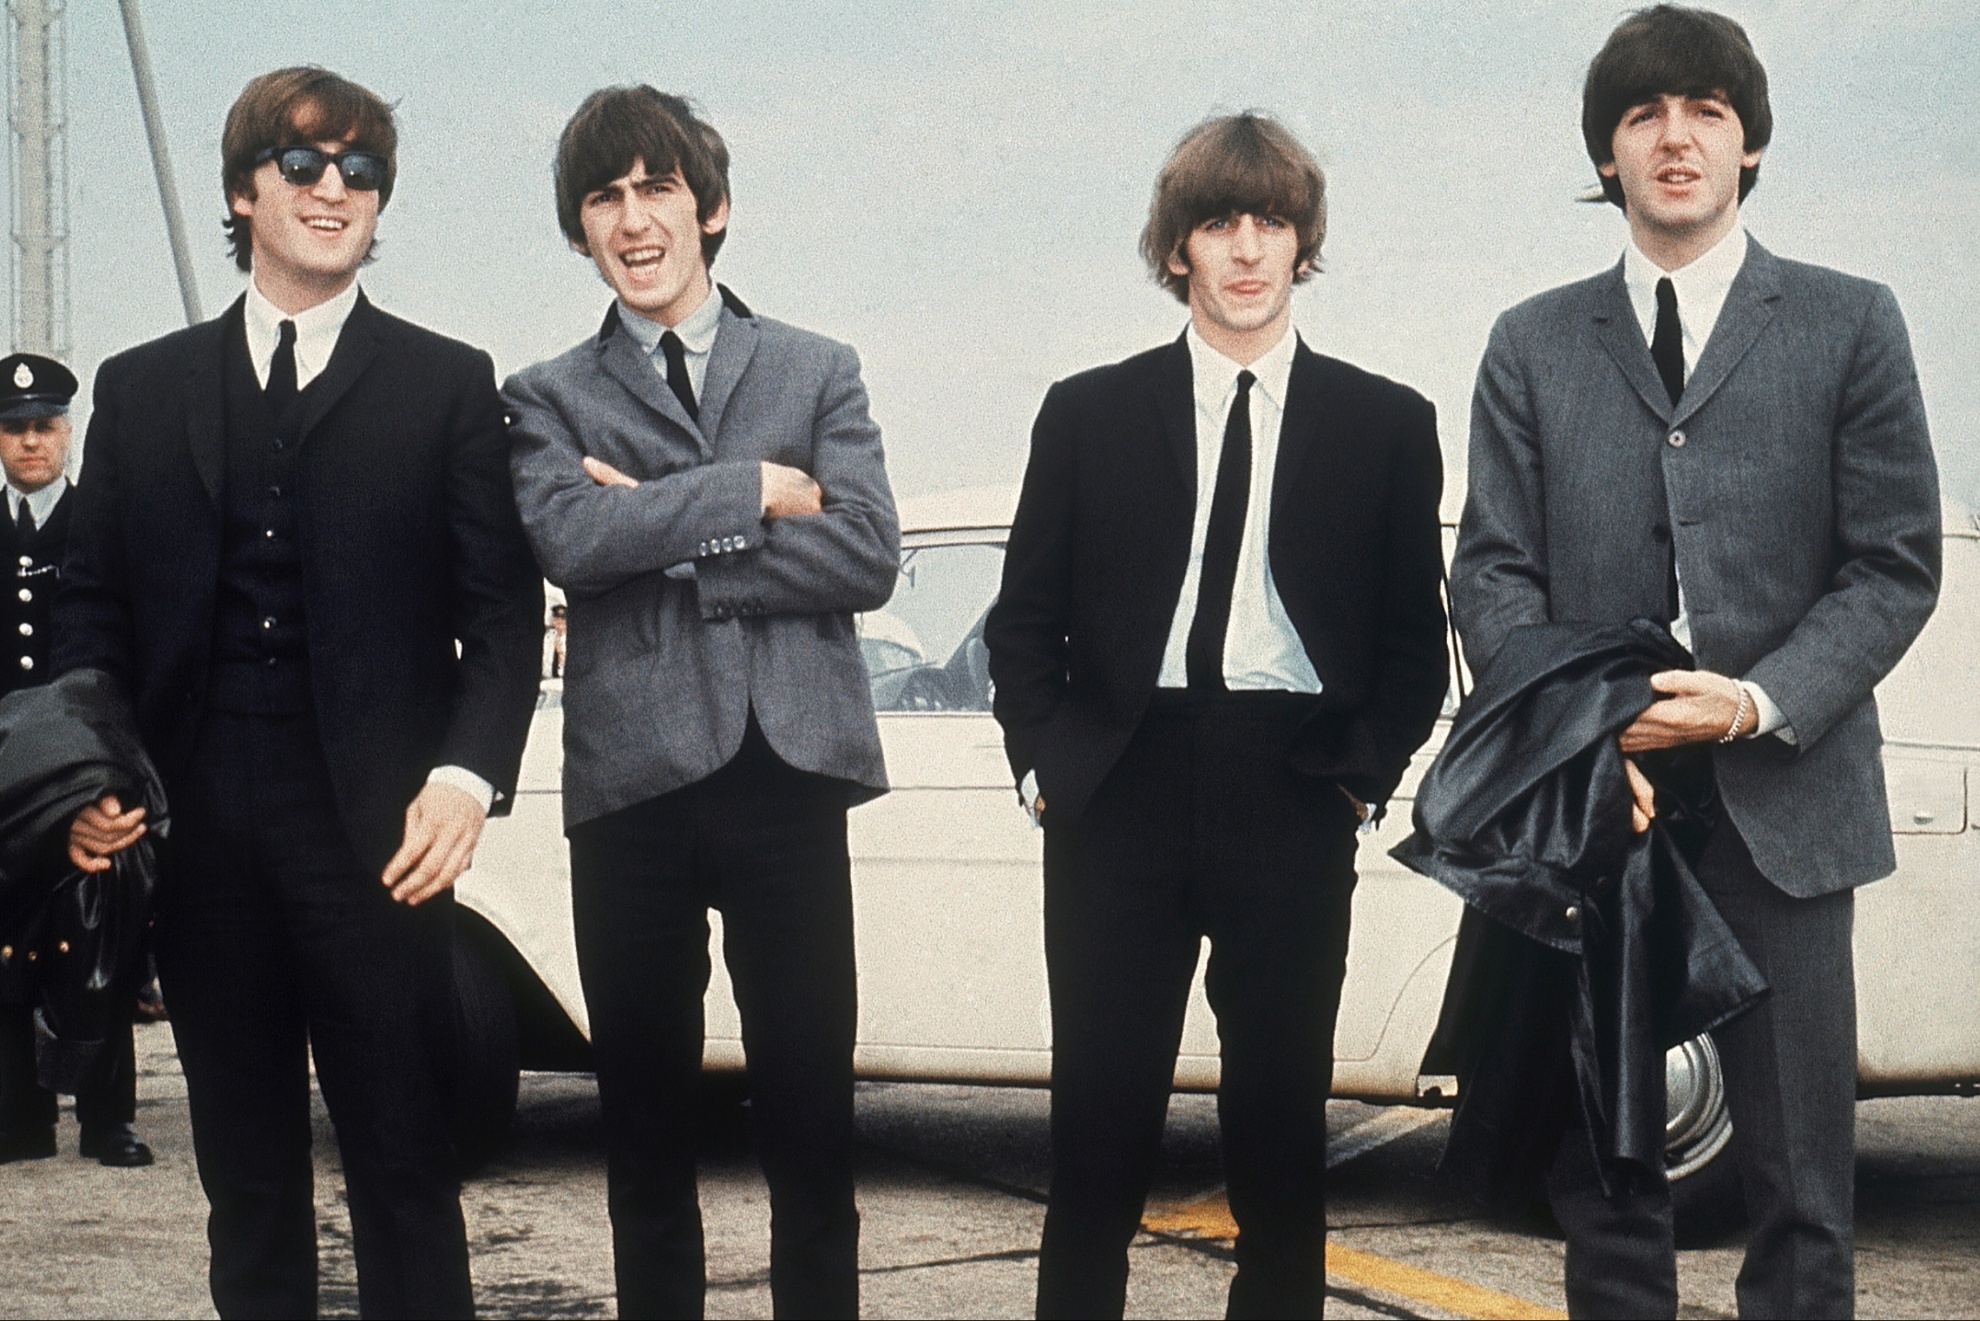 The legenday British band The Beatles.